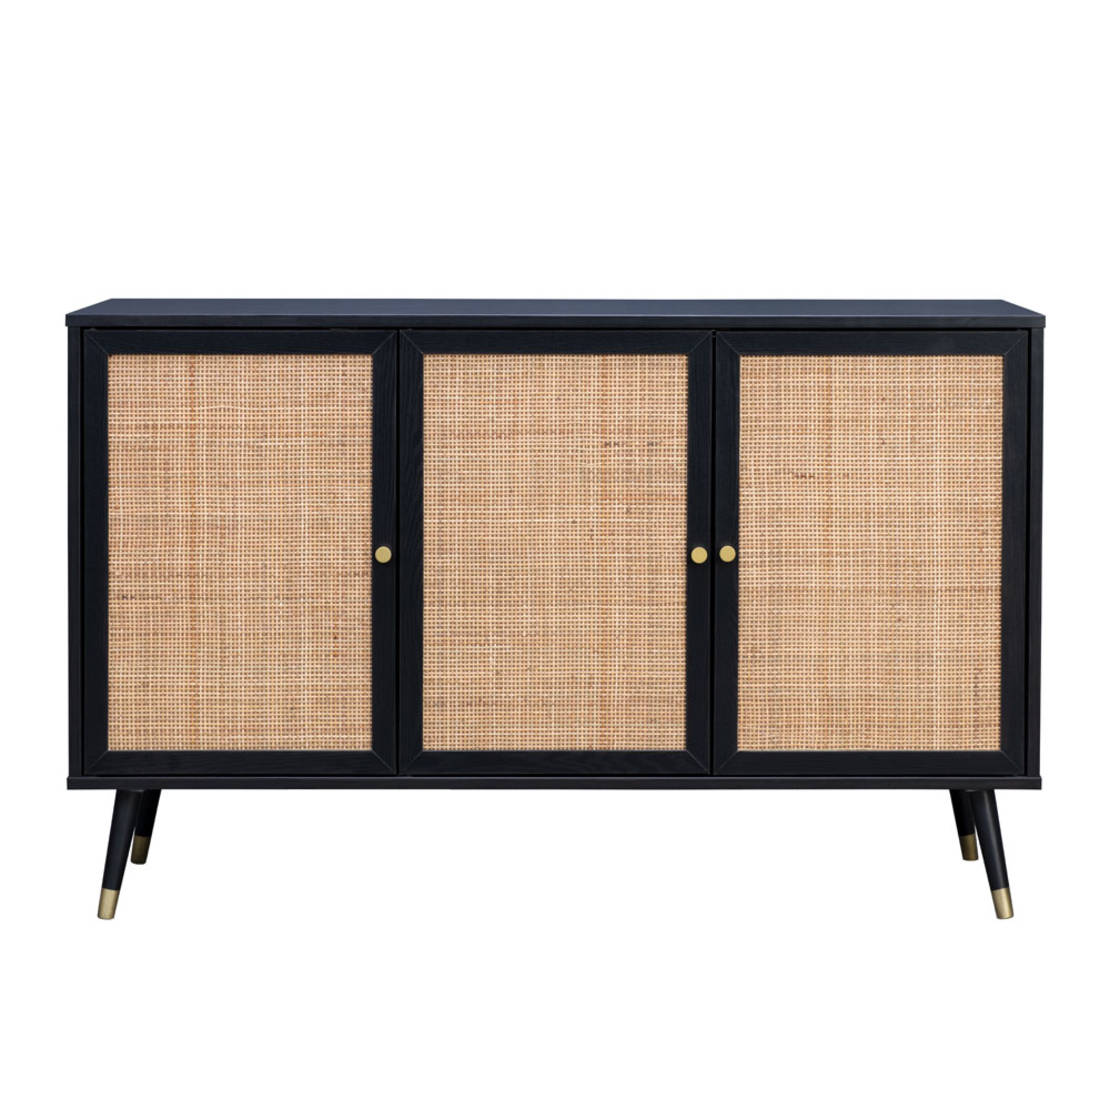 VIENNA SIDEBOARD CHIPBOARD WITH MELAMINE BLACK WITH RATTAN GOLD 120x39xH75,5cm E1 PRC